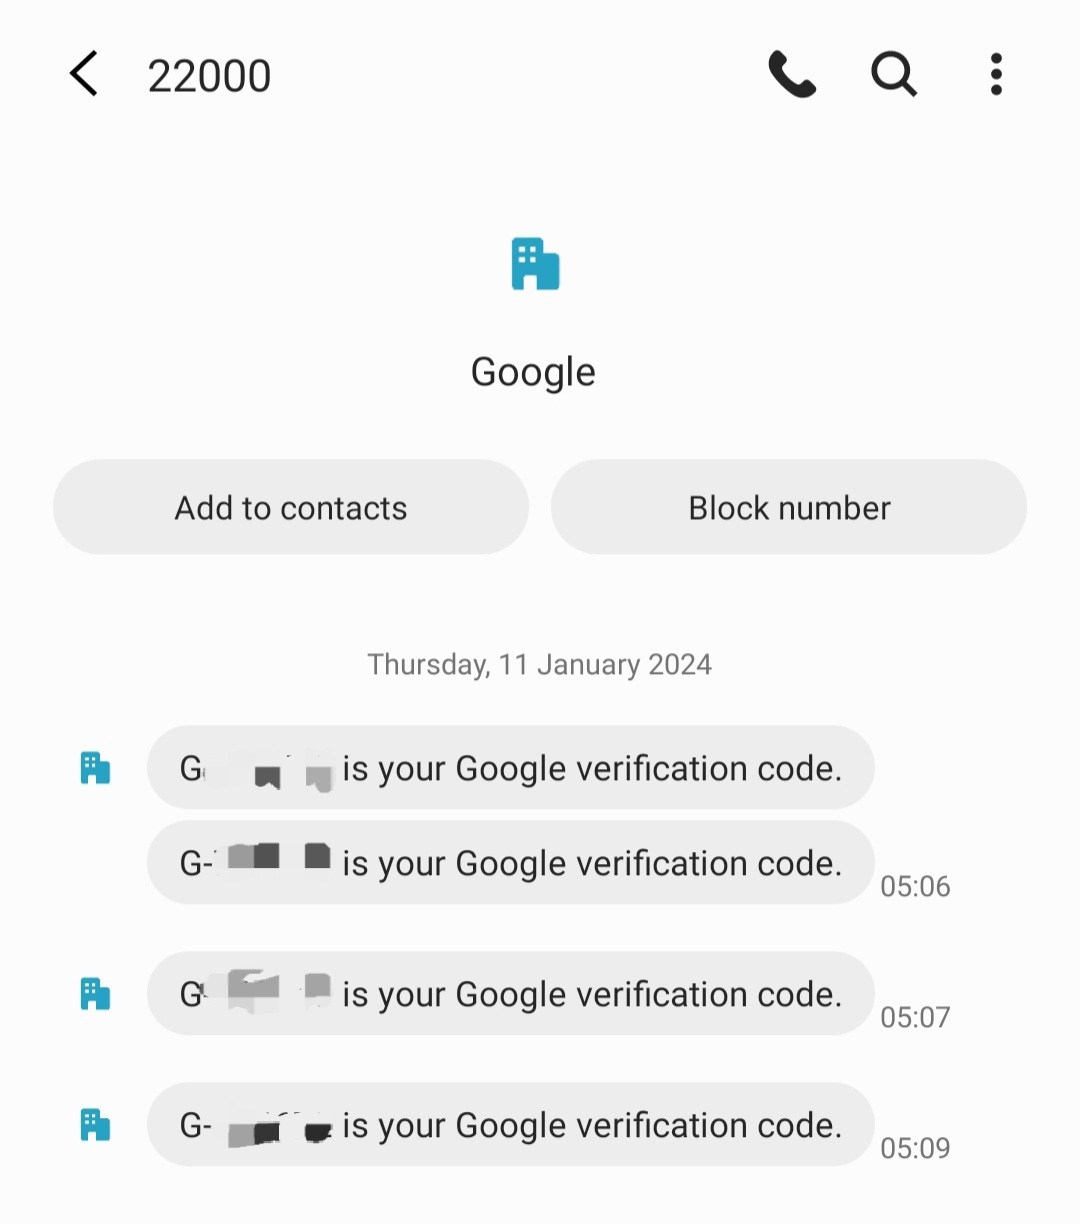 Screenshot of text messages with Google verification codes being sent to my number from attempts to sign into my Google account.